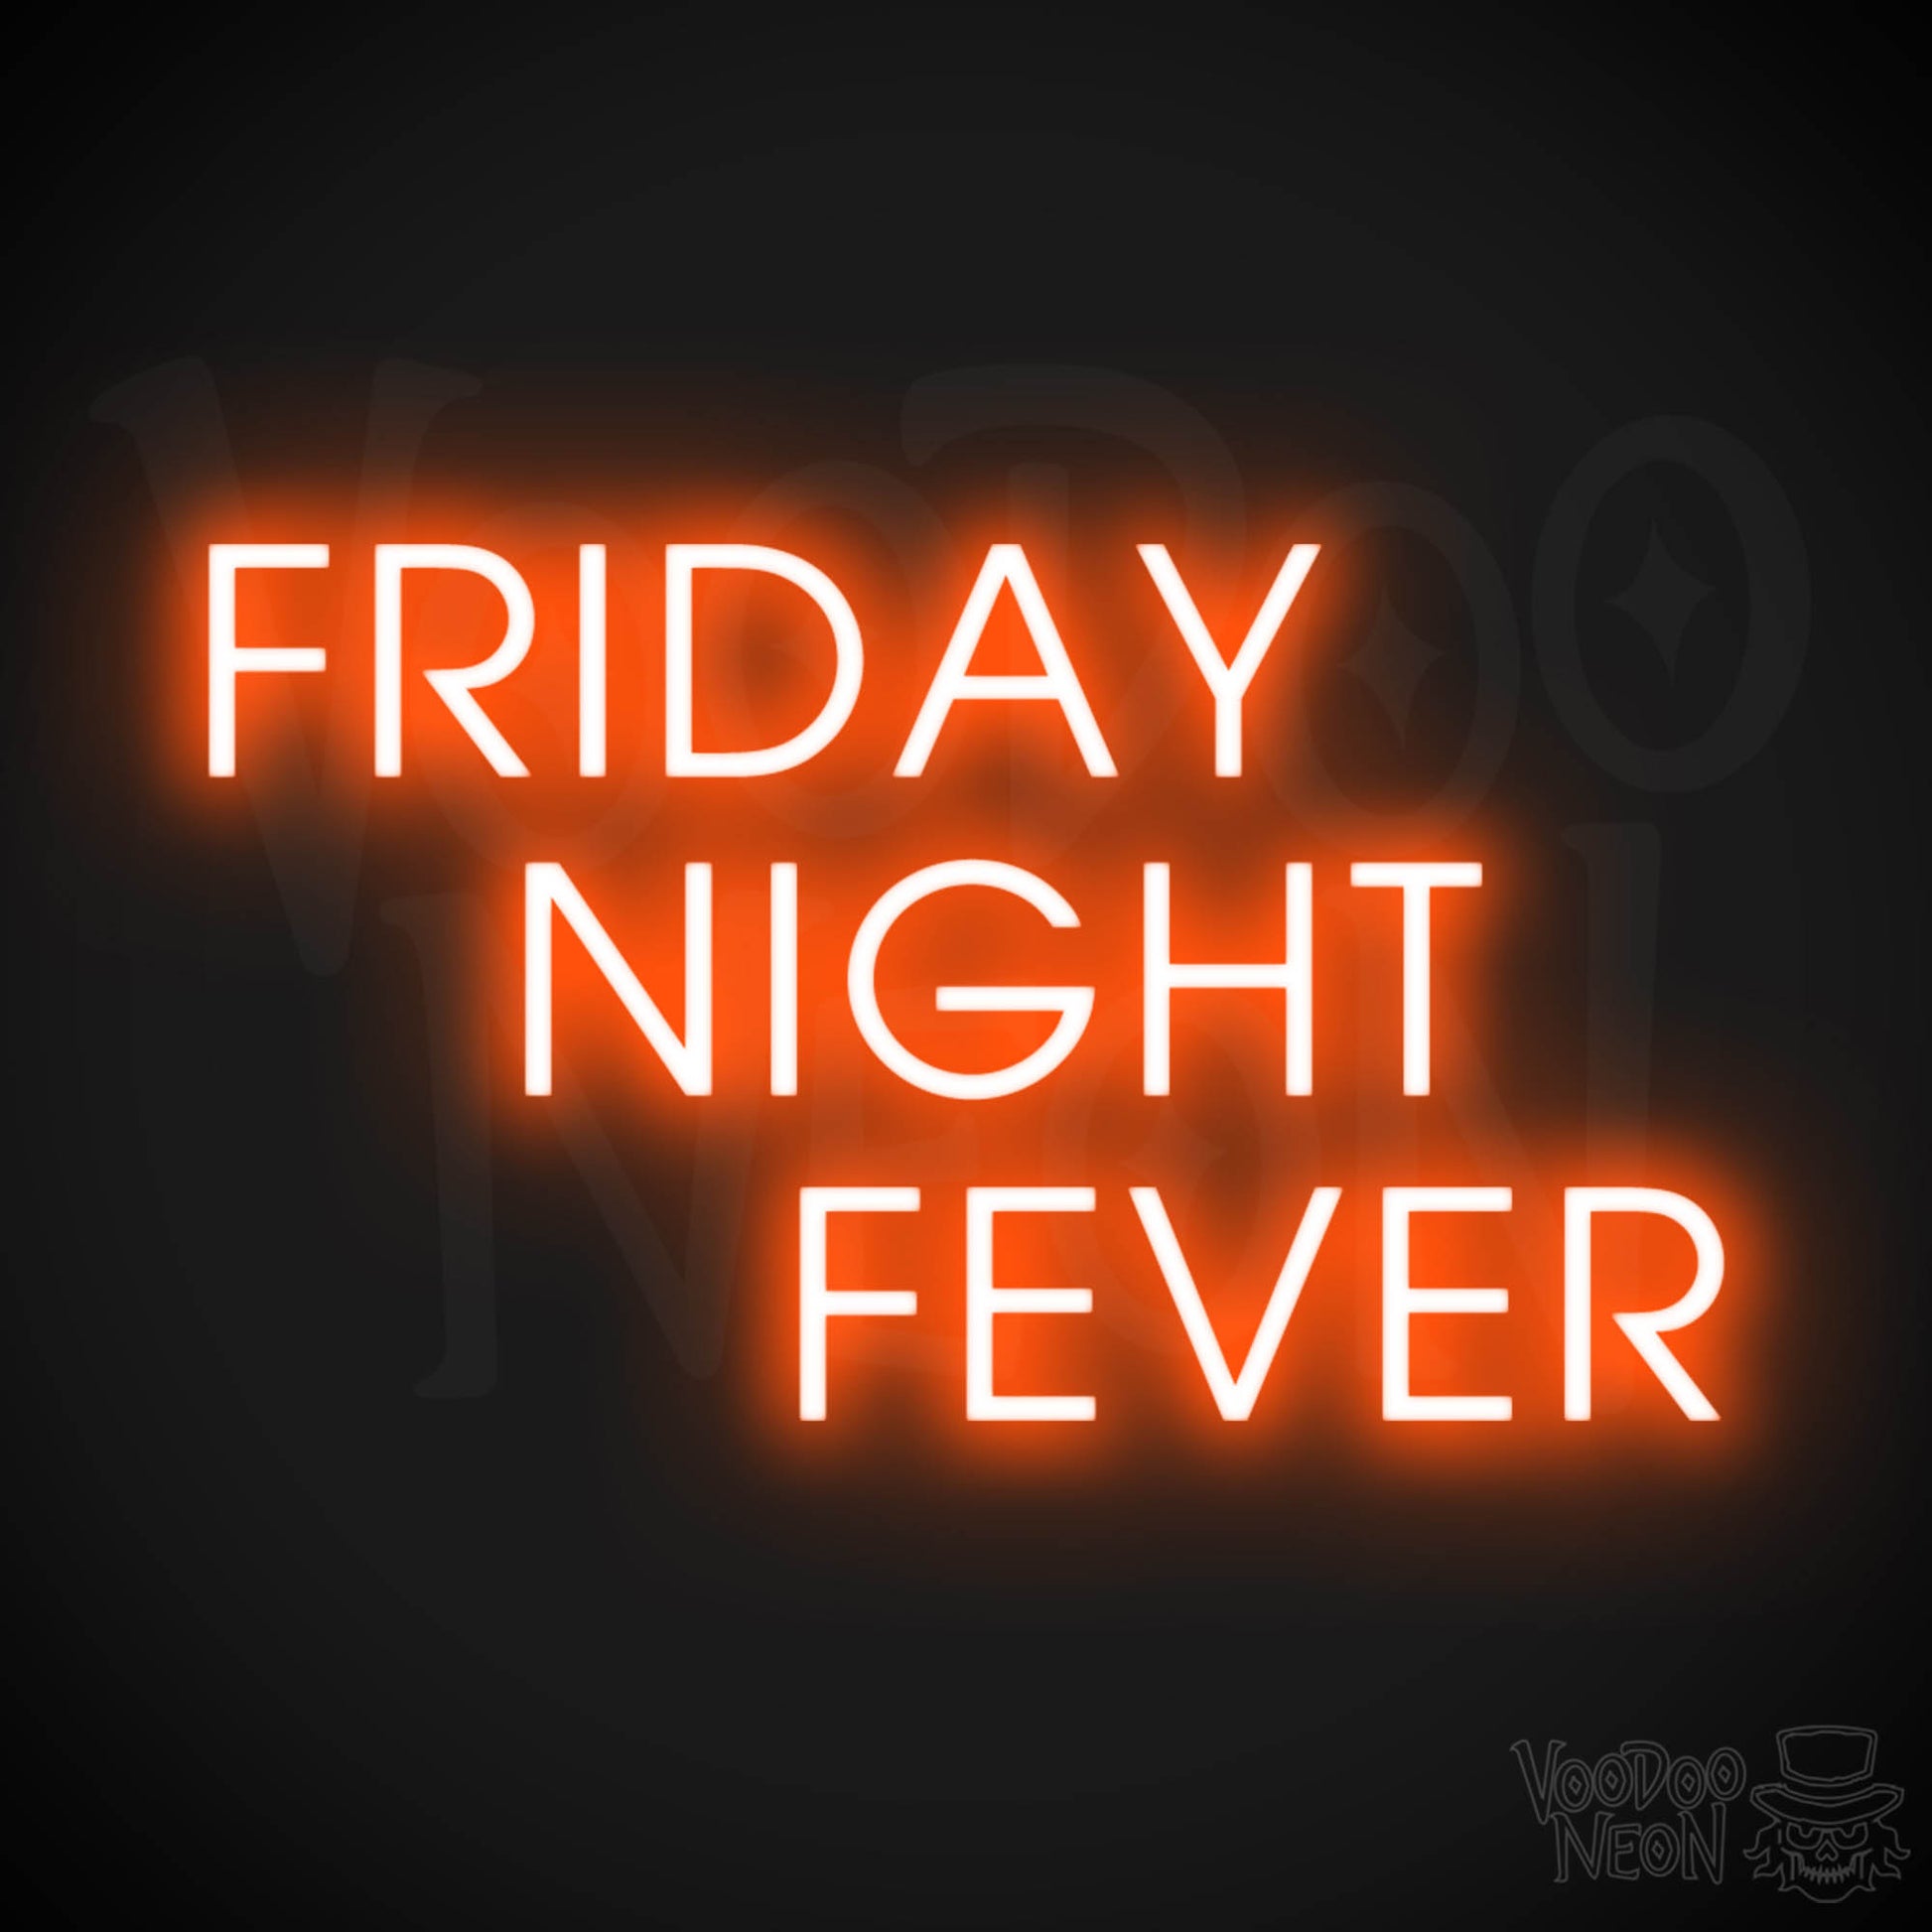 Friday Night Fever Neon Sign - LED Wall Art - Color Orange